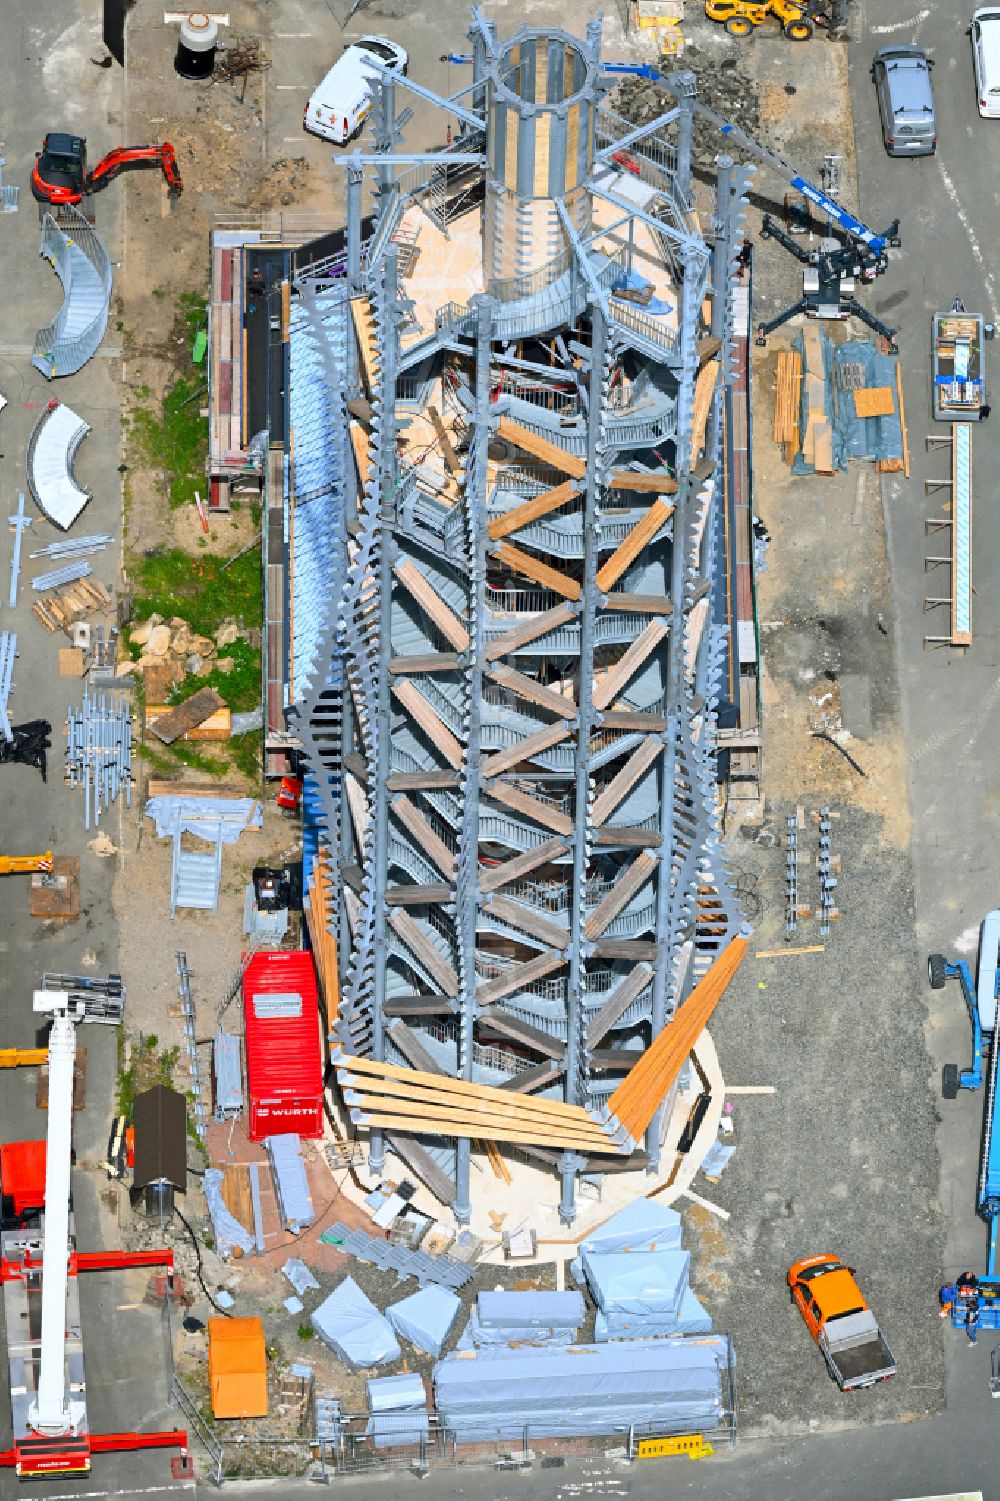 Torfhaus from above - Construction of the new building of the observation tower of Harzturm GmbH in Torfhaus in the Harz in the state Lower Saxony, Germany